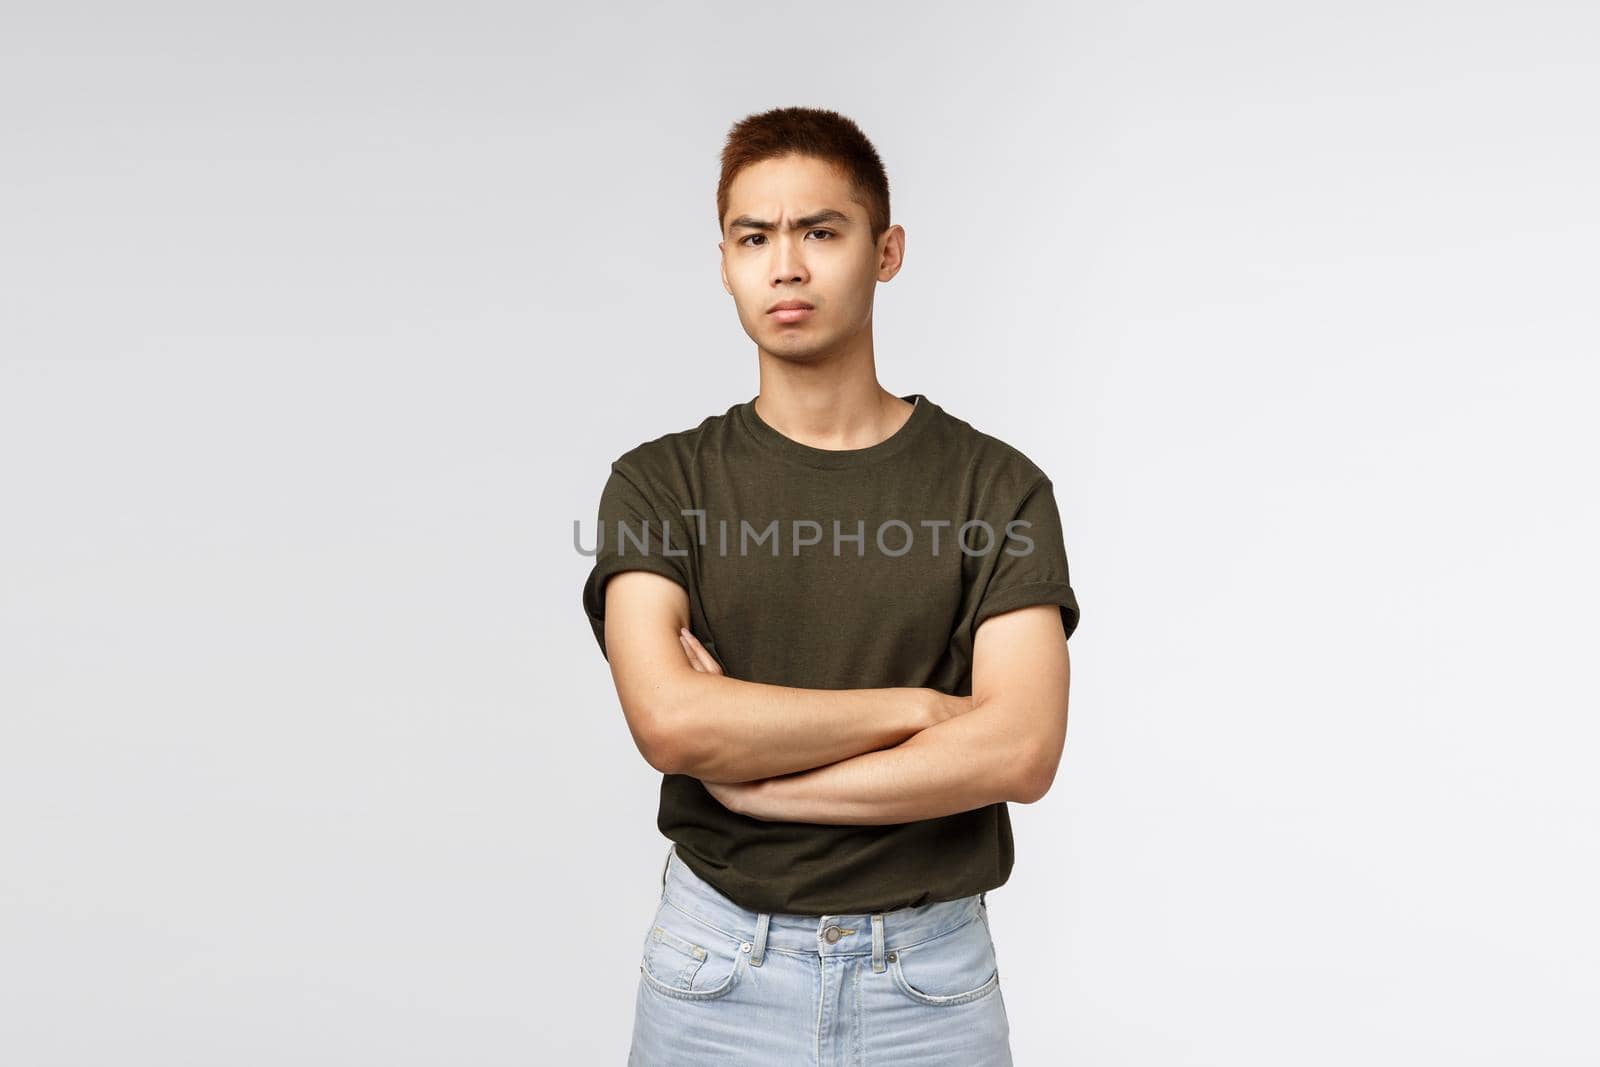 Suspicious serious-looking asian man, cross arms chest and frowning, stare camera with disbelief, dont buy any word person saying, standing tensed and disappointed over grey background.